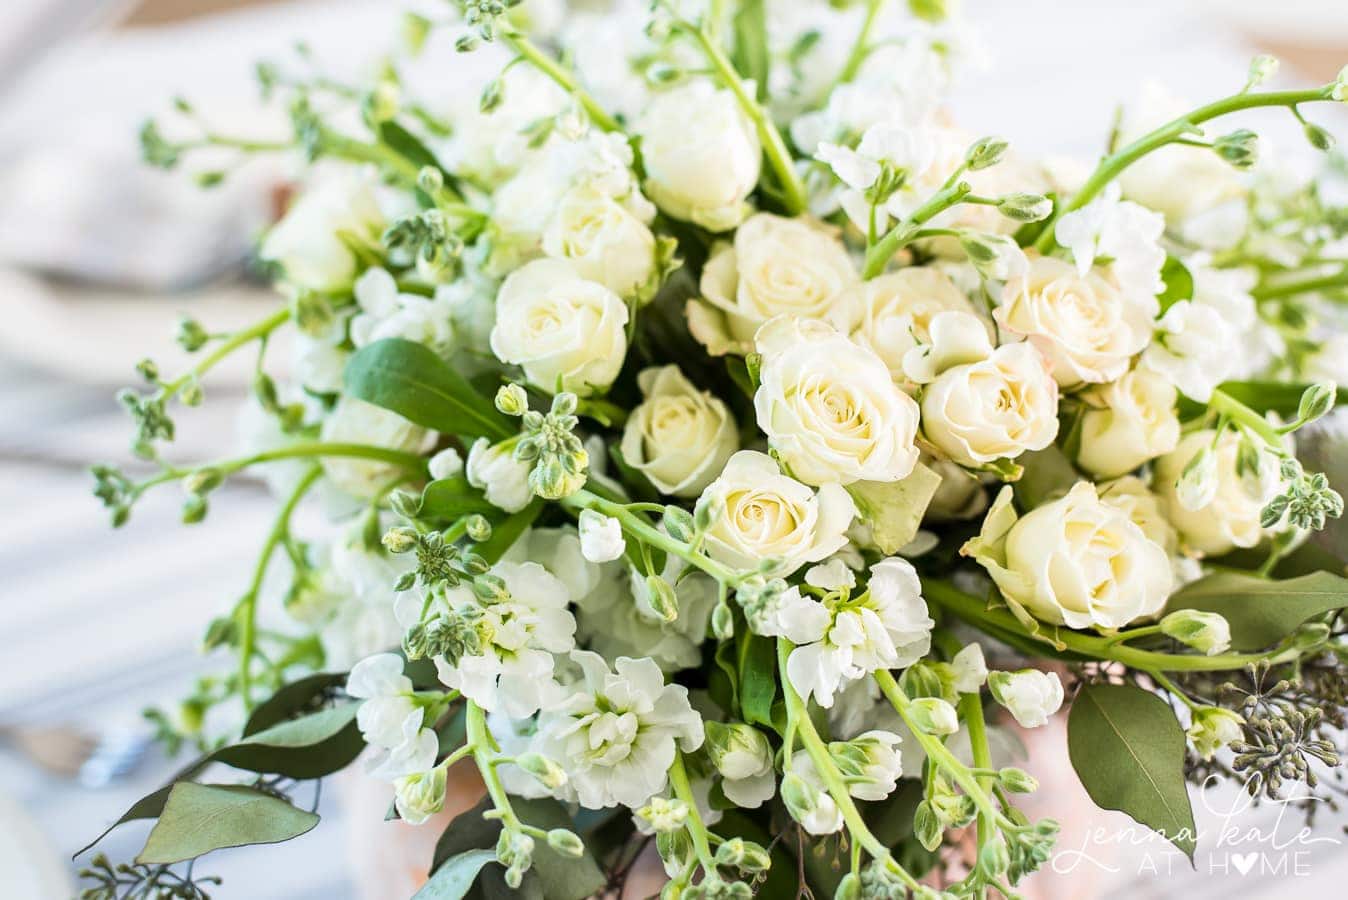 A close up of a large arrangement of white flowers and greenery in a vase on a table